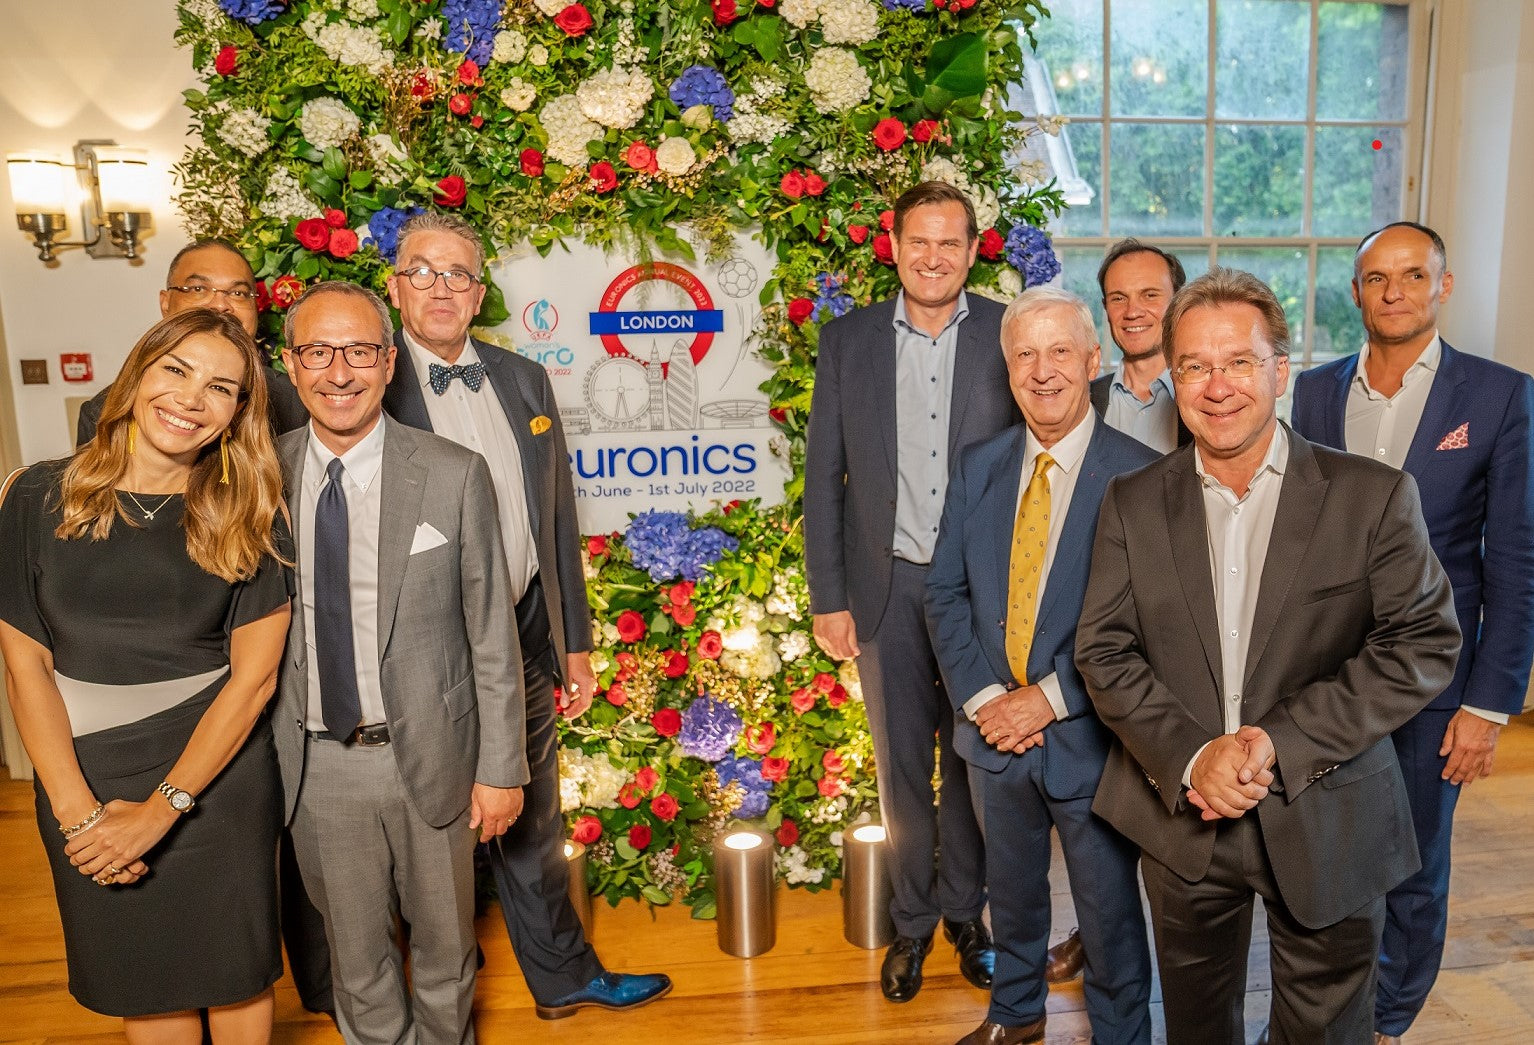 EURONICS GROUP ELECTS NEW BOARD OF DIRECTORS